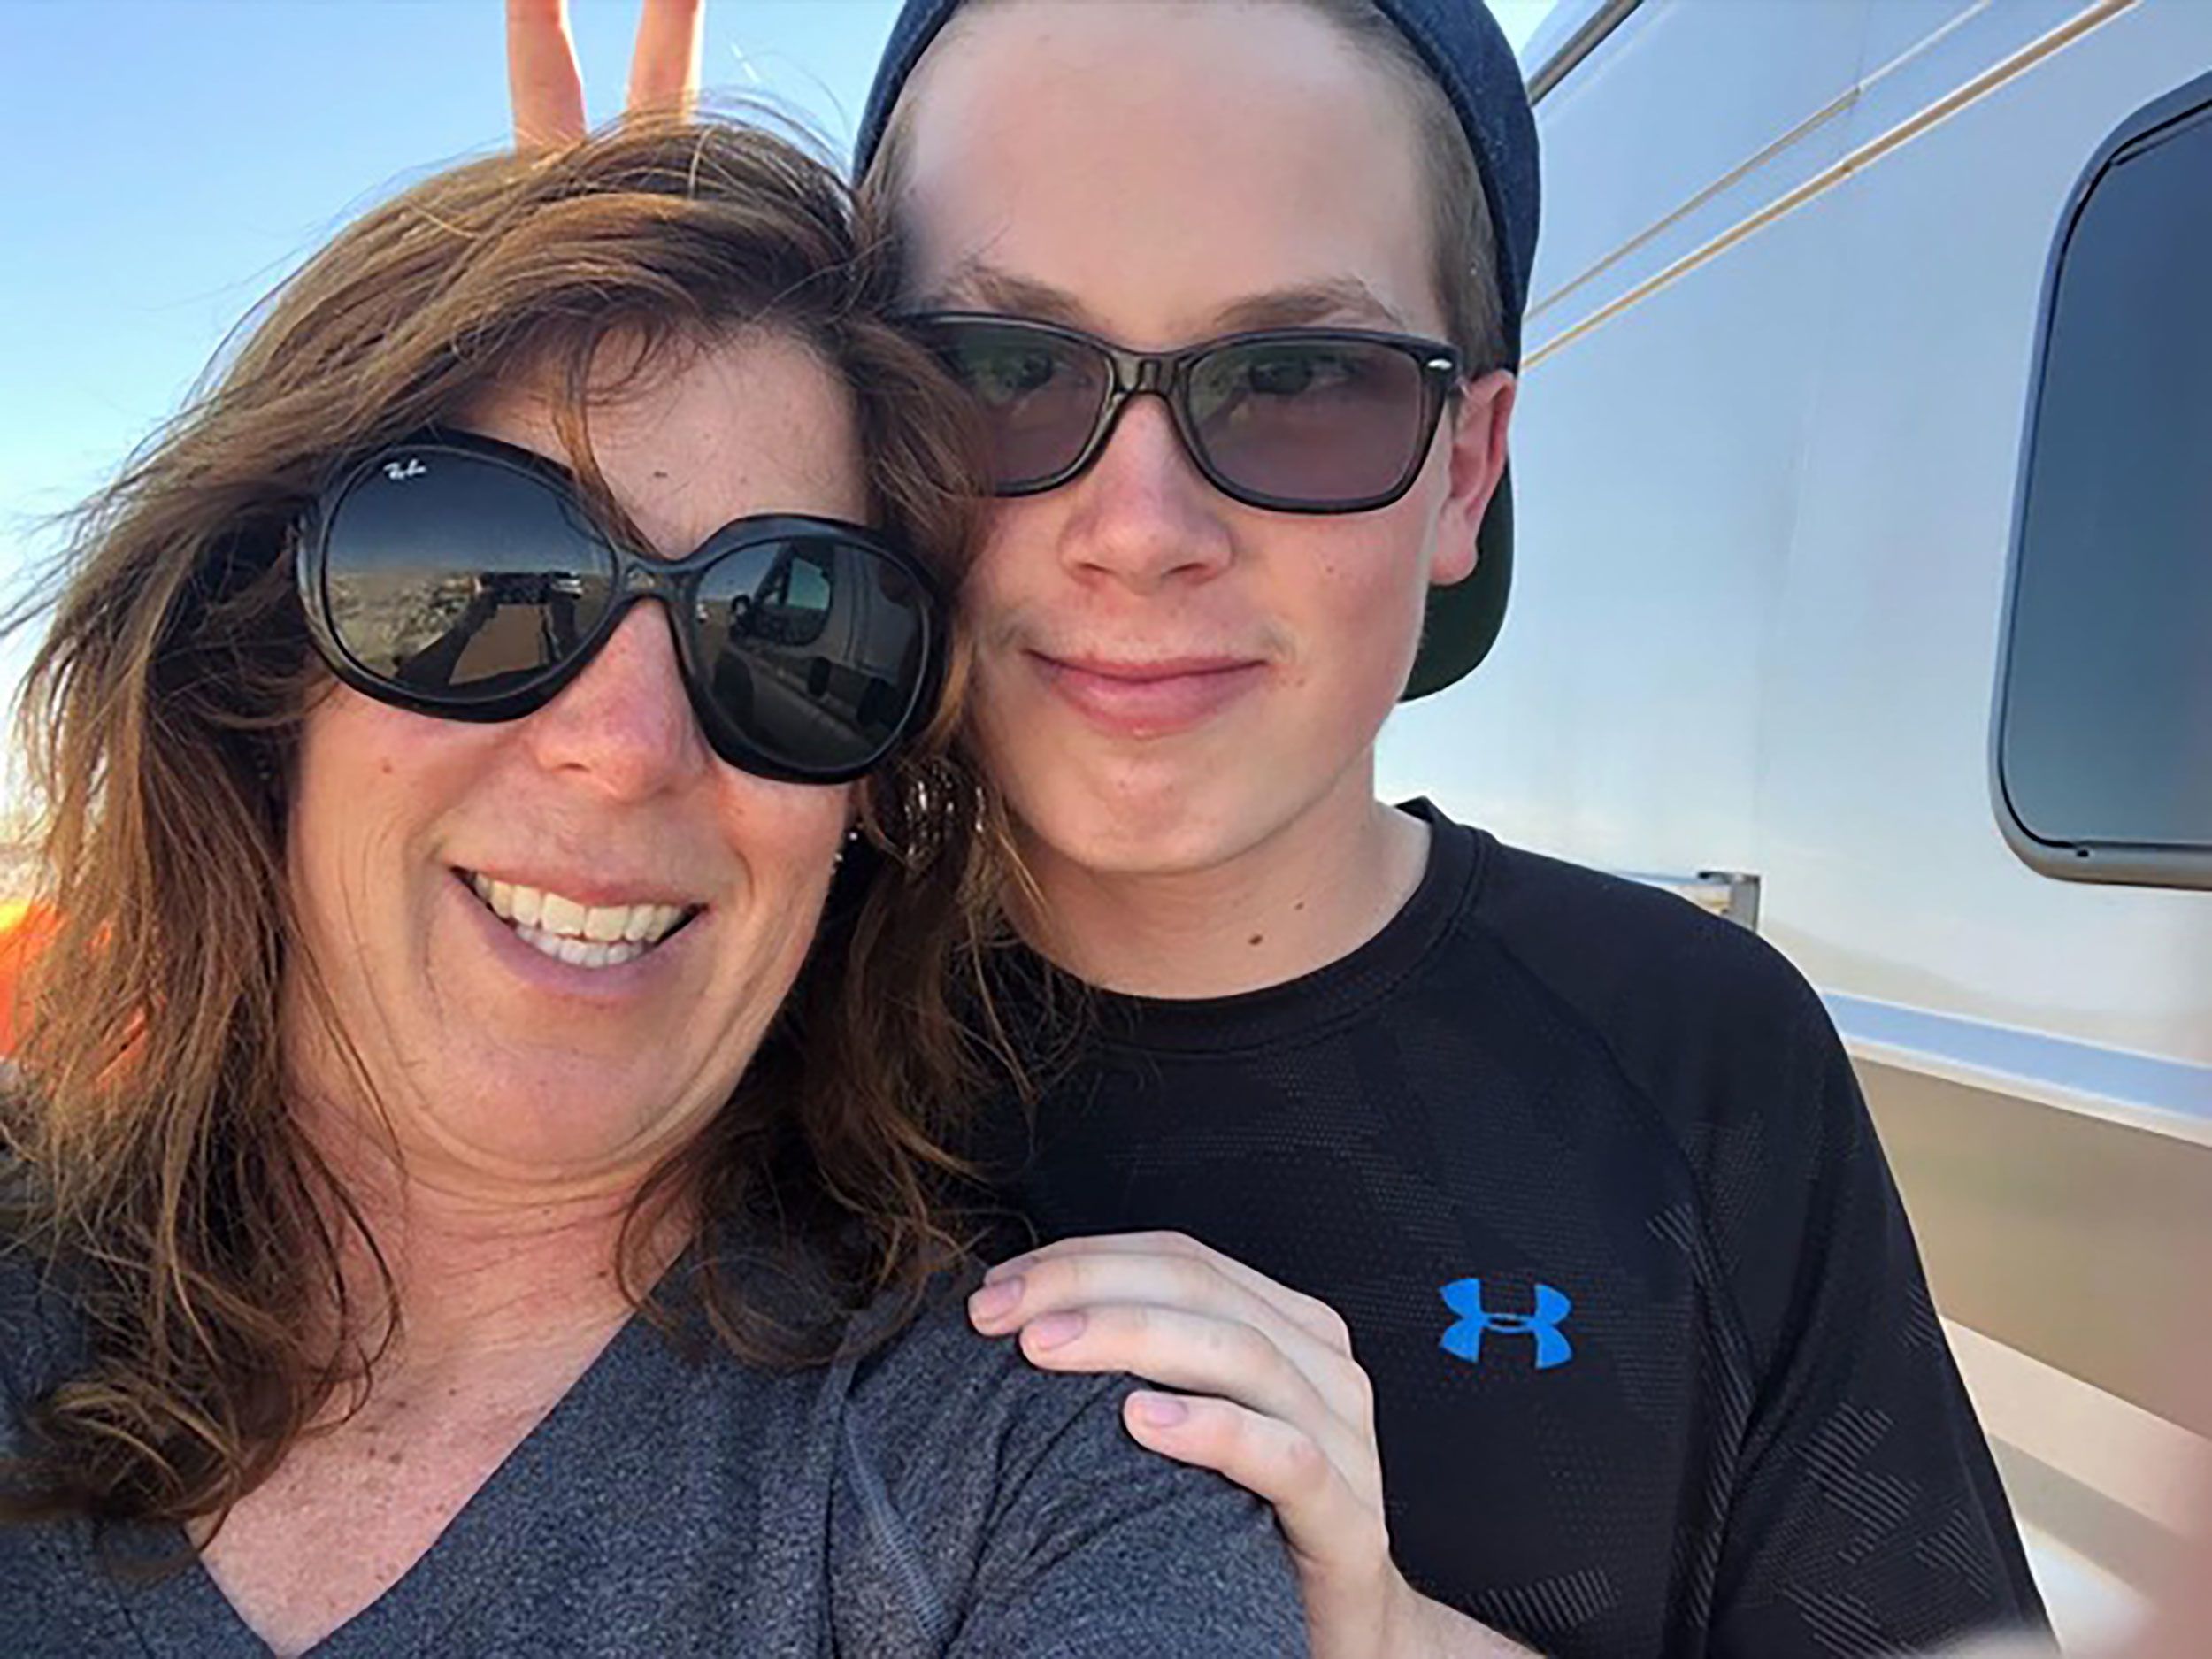 Boy And Milf - A 17-year-old boy died by suicide hours after being scammed. The FBI says  it's part of a troubling increase in 'sextortion' cases. | CNN